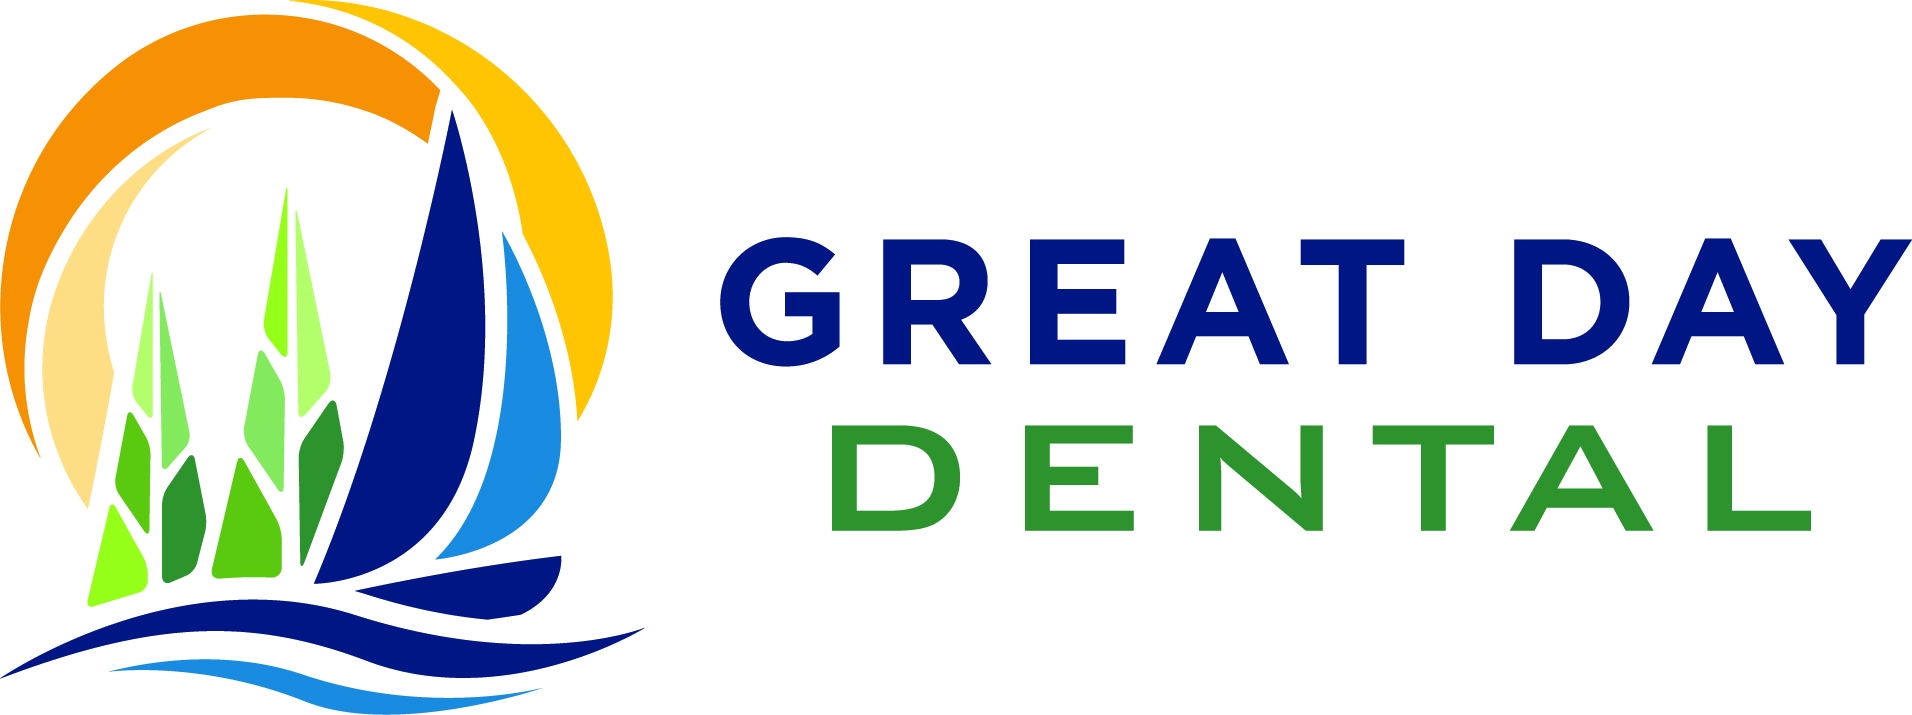 Great Day Dental